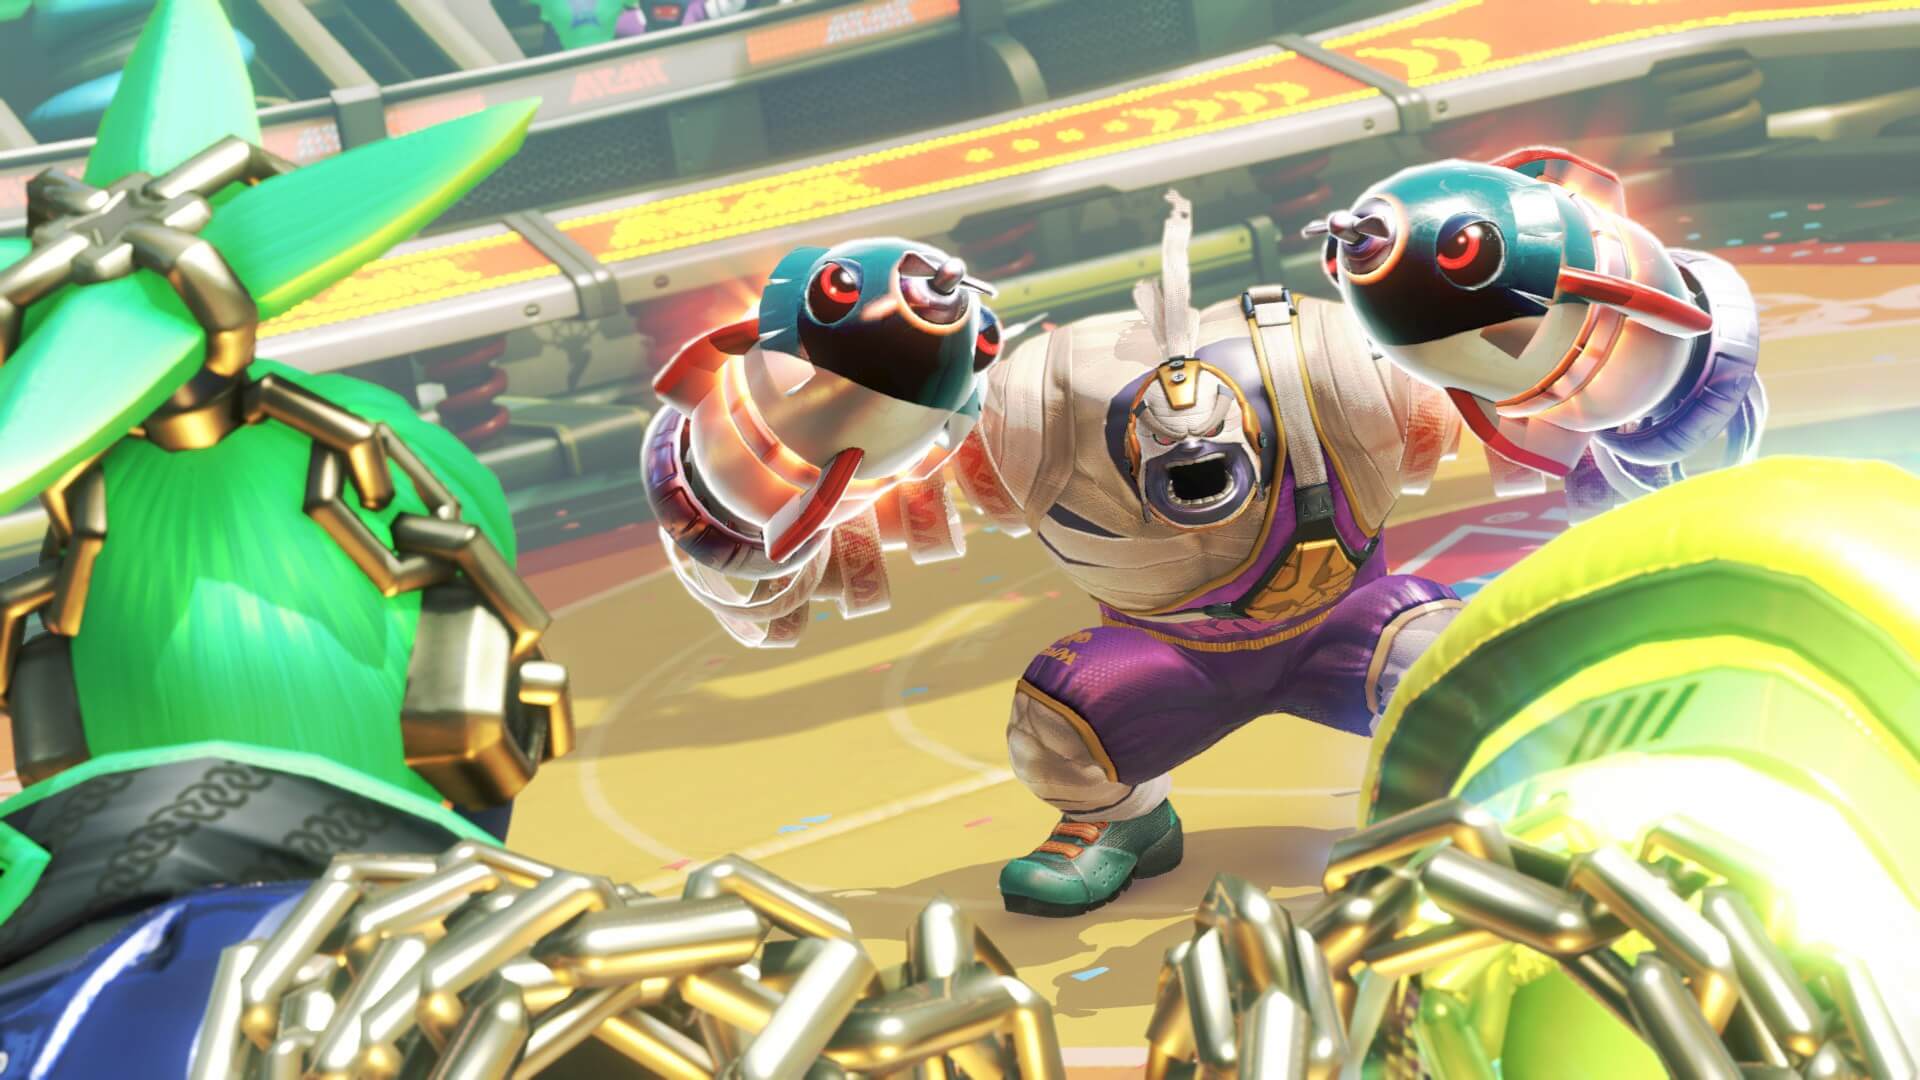 Arms is one of Nintendo's new IPs coming to the Switch. 